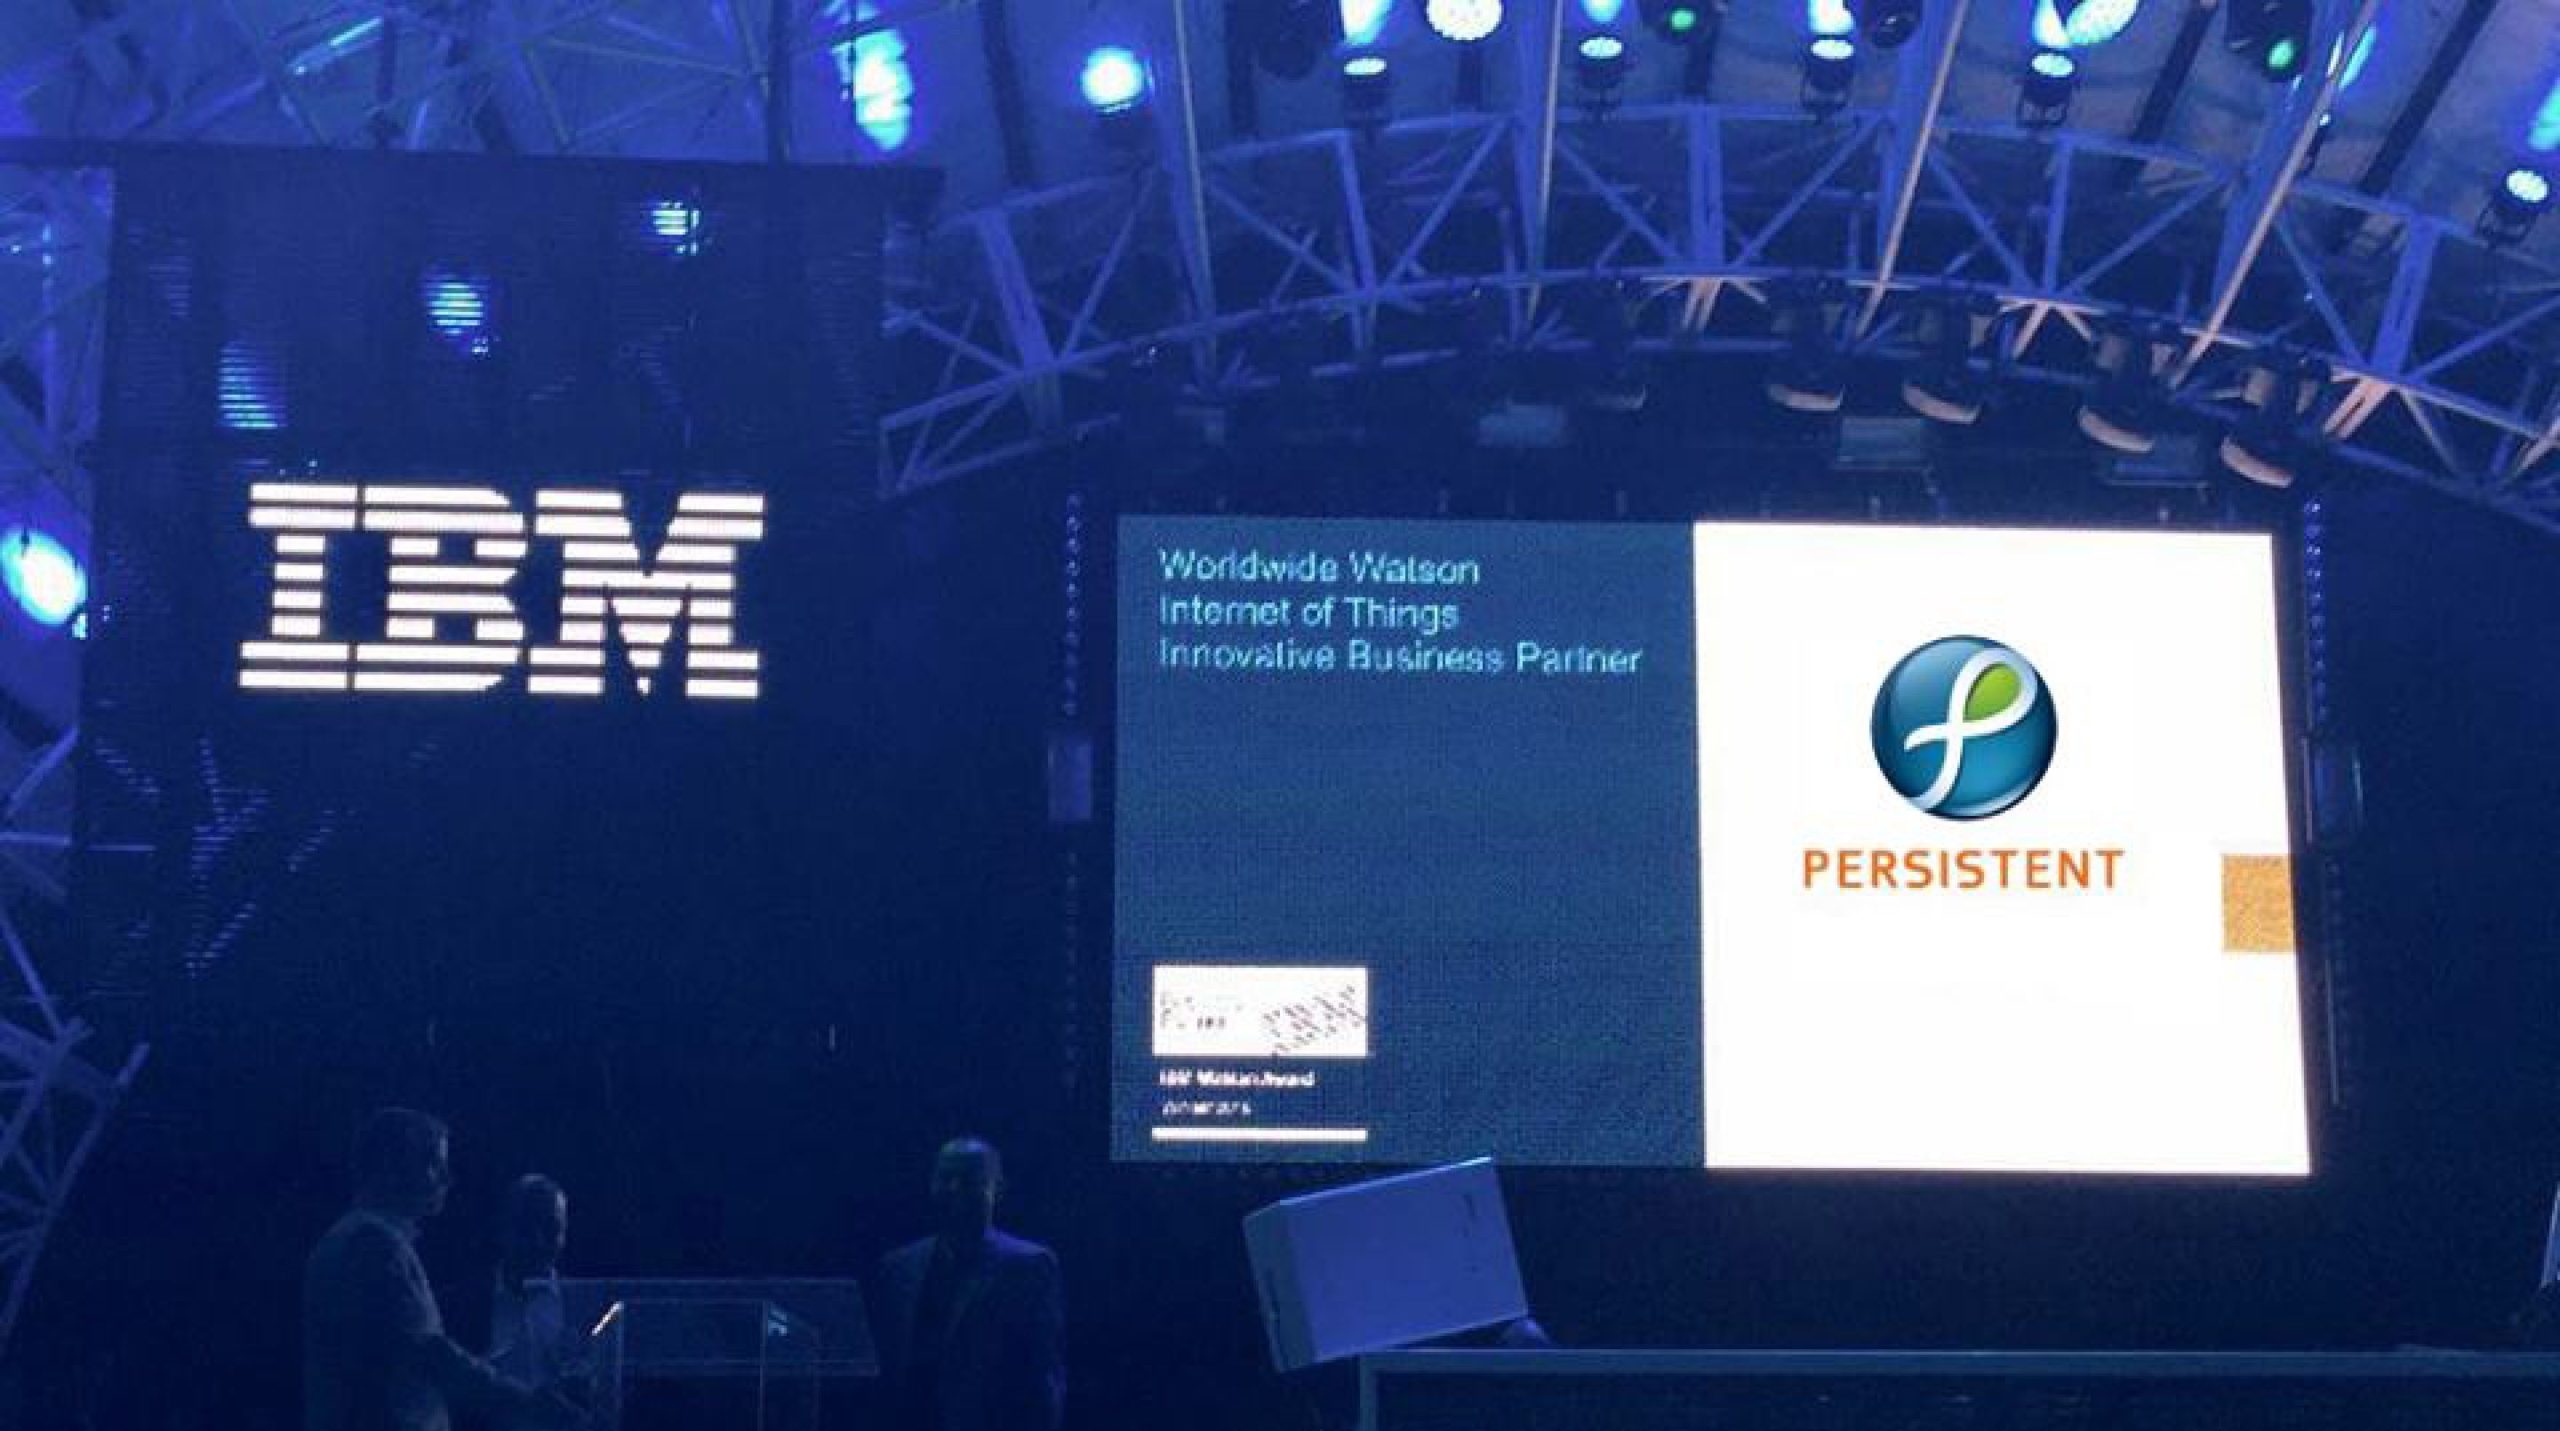 IBM’s 2016 Worldwide Watson Internet of Things Innovative Business Partner of the Year award, for Persistent Systems!